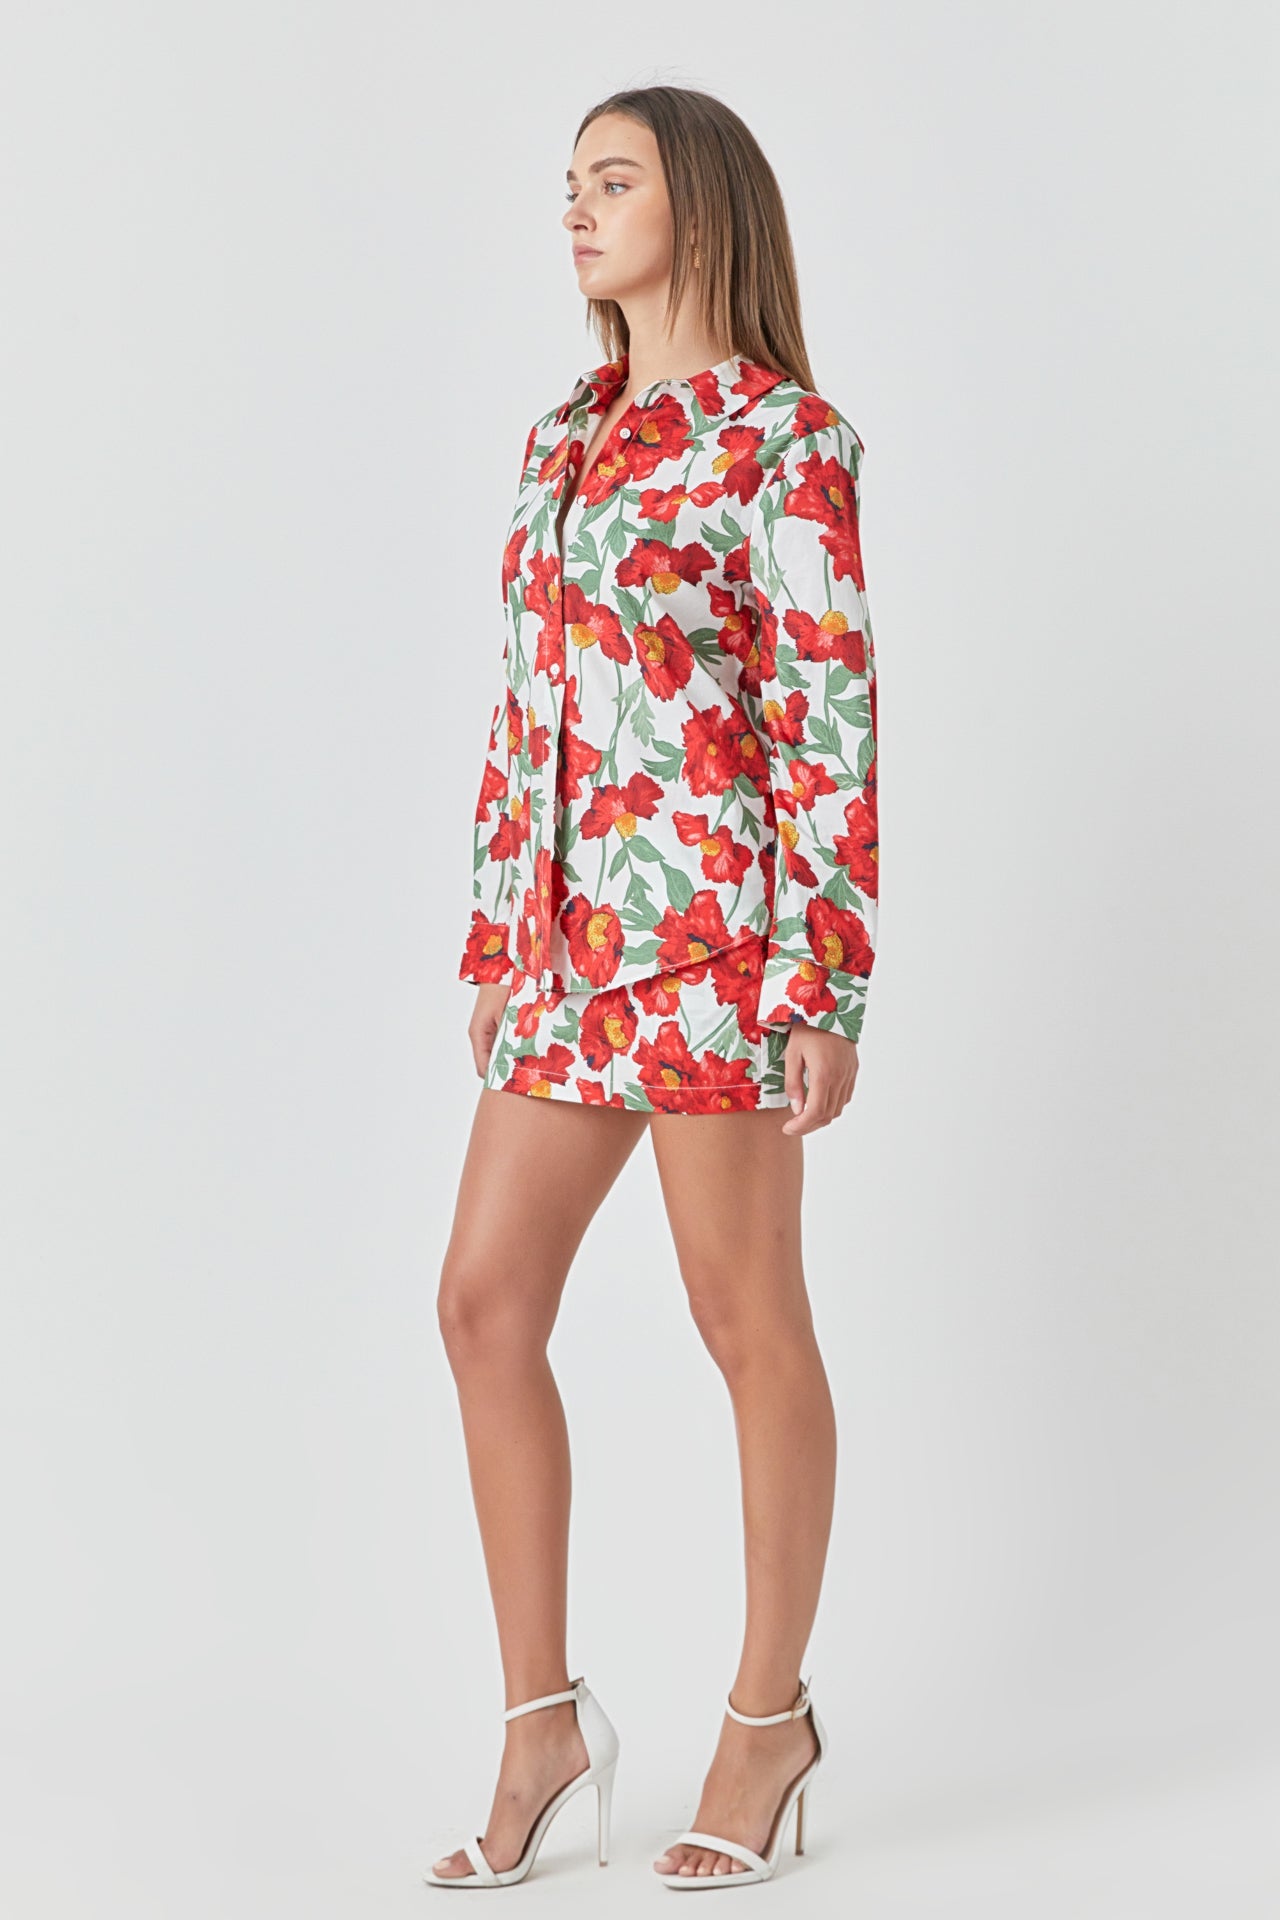 ENDLESS ROSE - Floral Print Cotton Shirt - SHIRTS & BLOUSES available at Objectrare